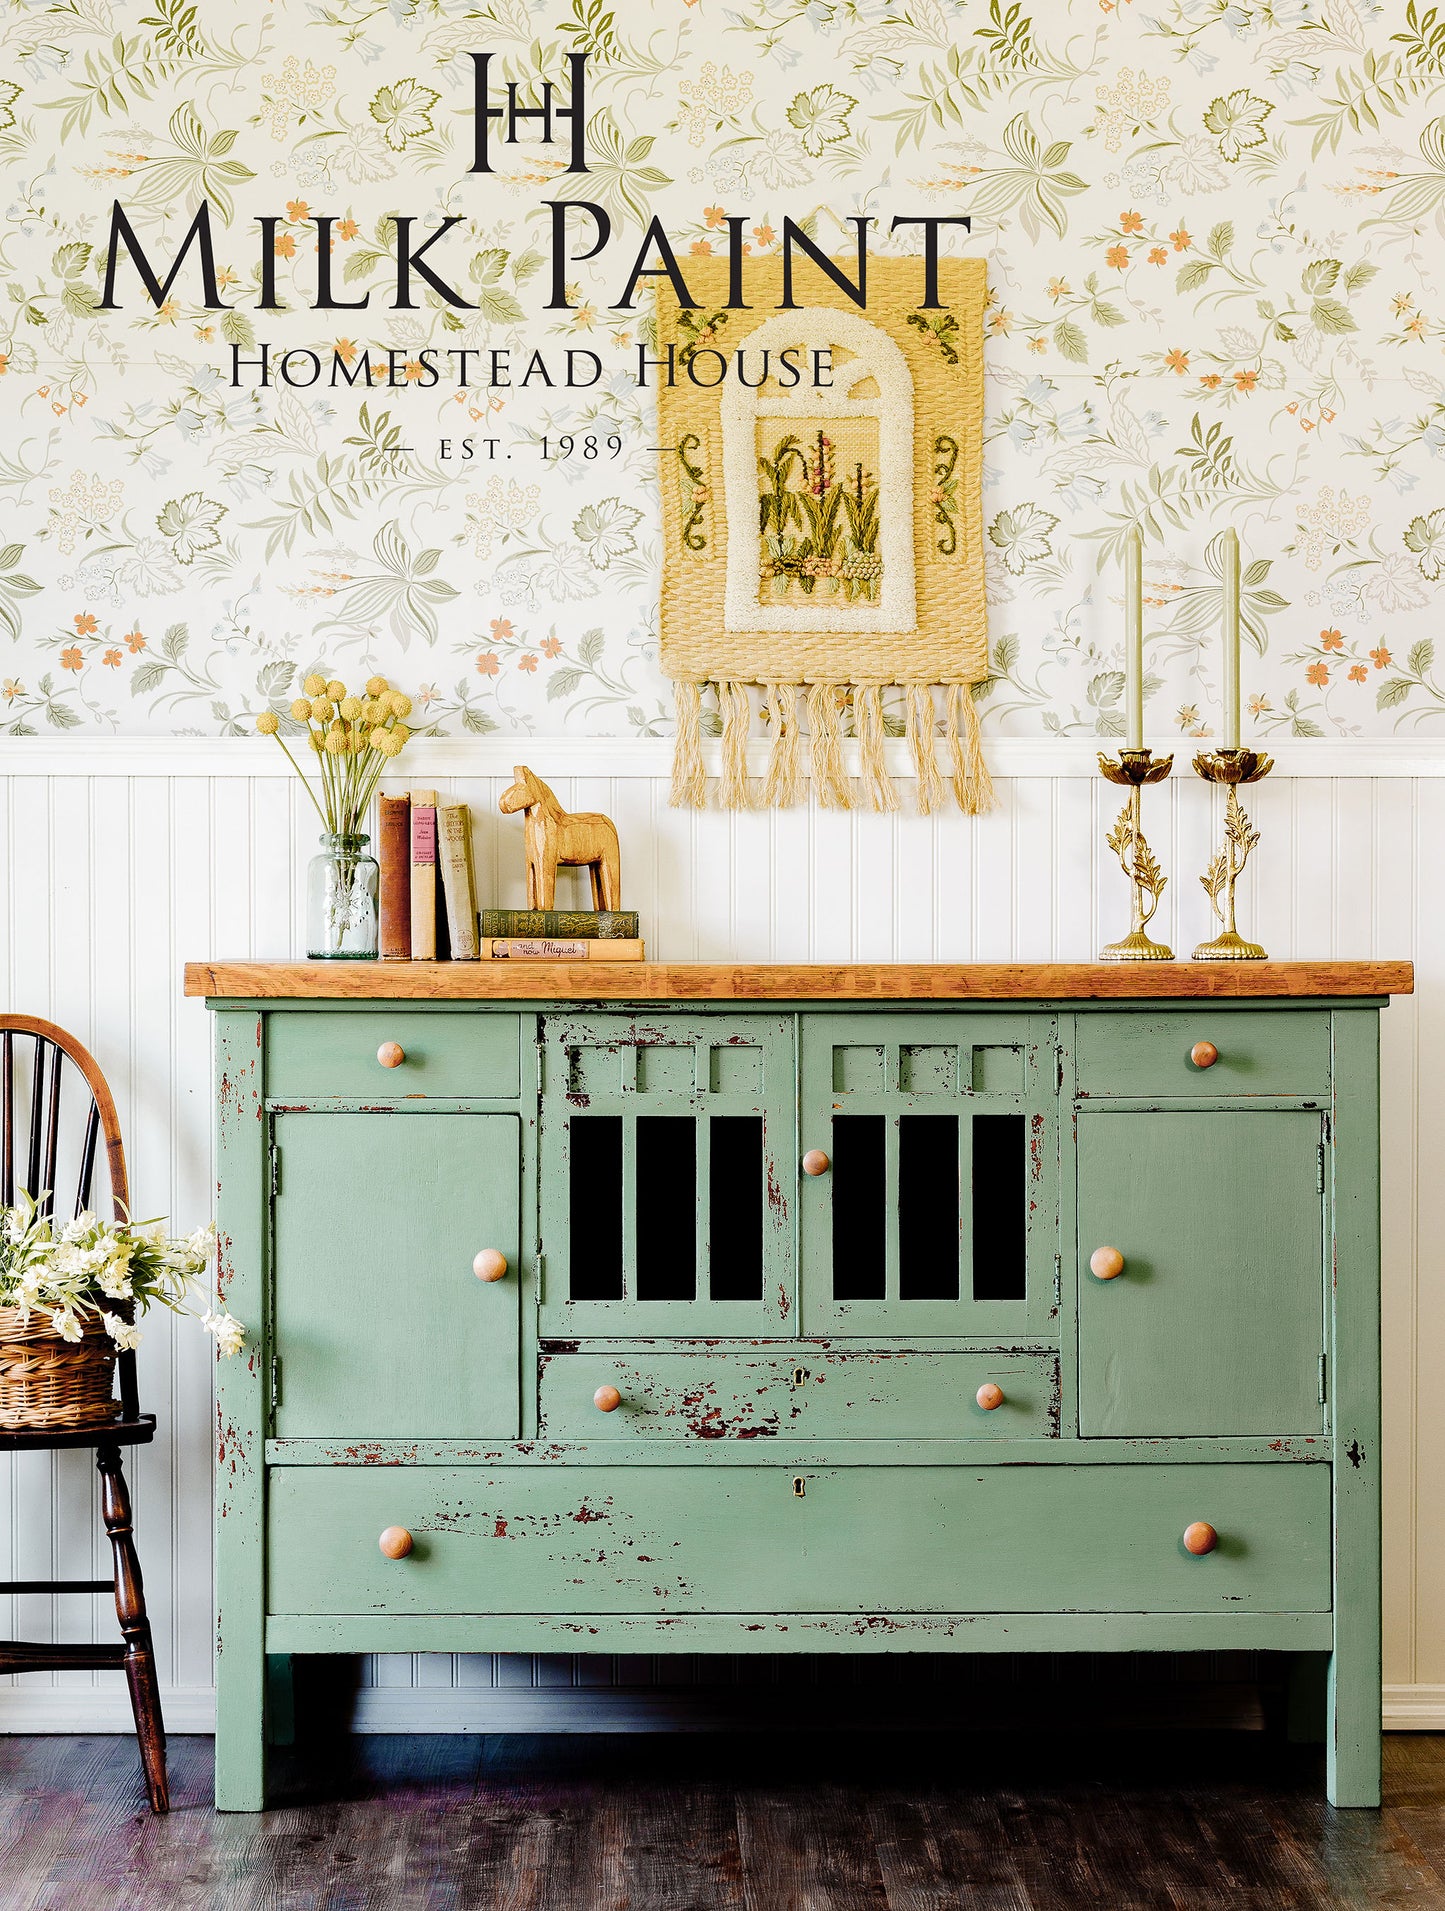 STOCKHOLM GREEN Milk Paint by Homestead House 50g and 300g